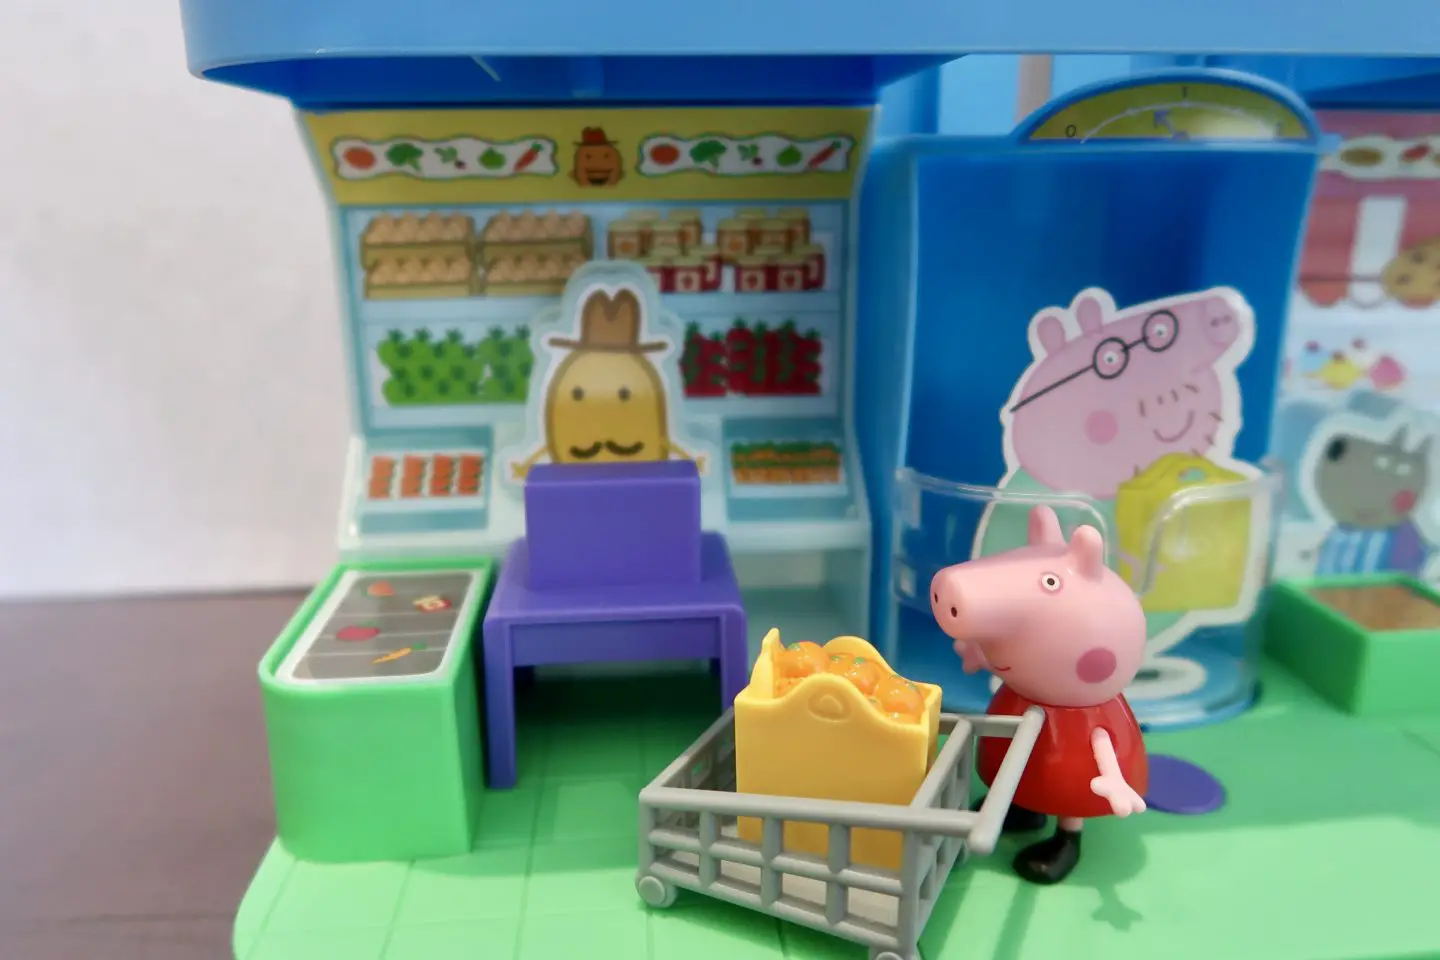 A Peppa Pig figure with a shopping trolley in a toy shop